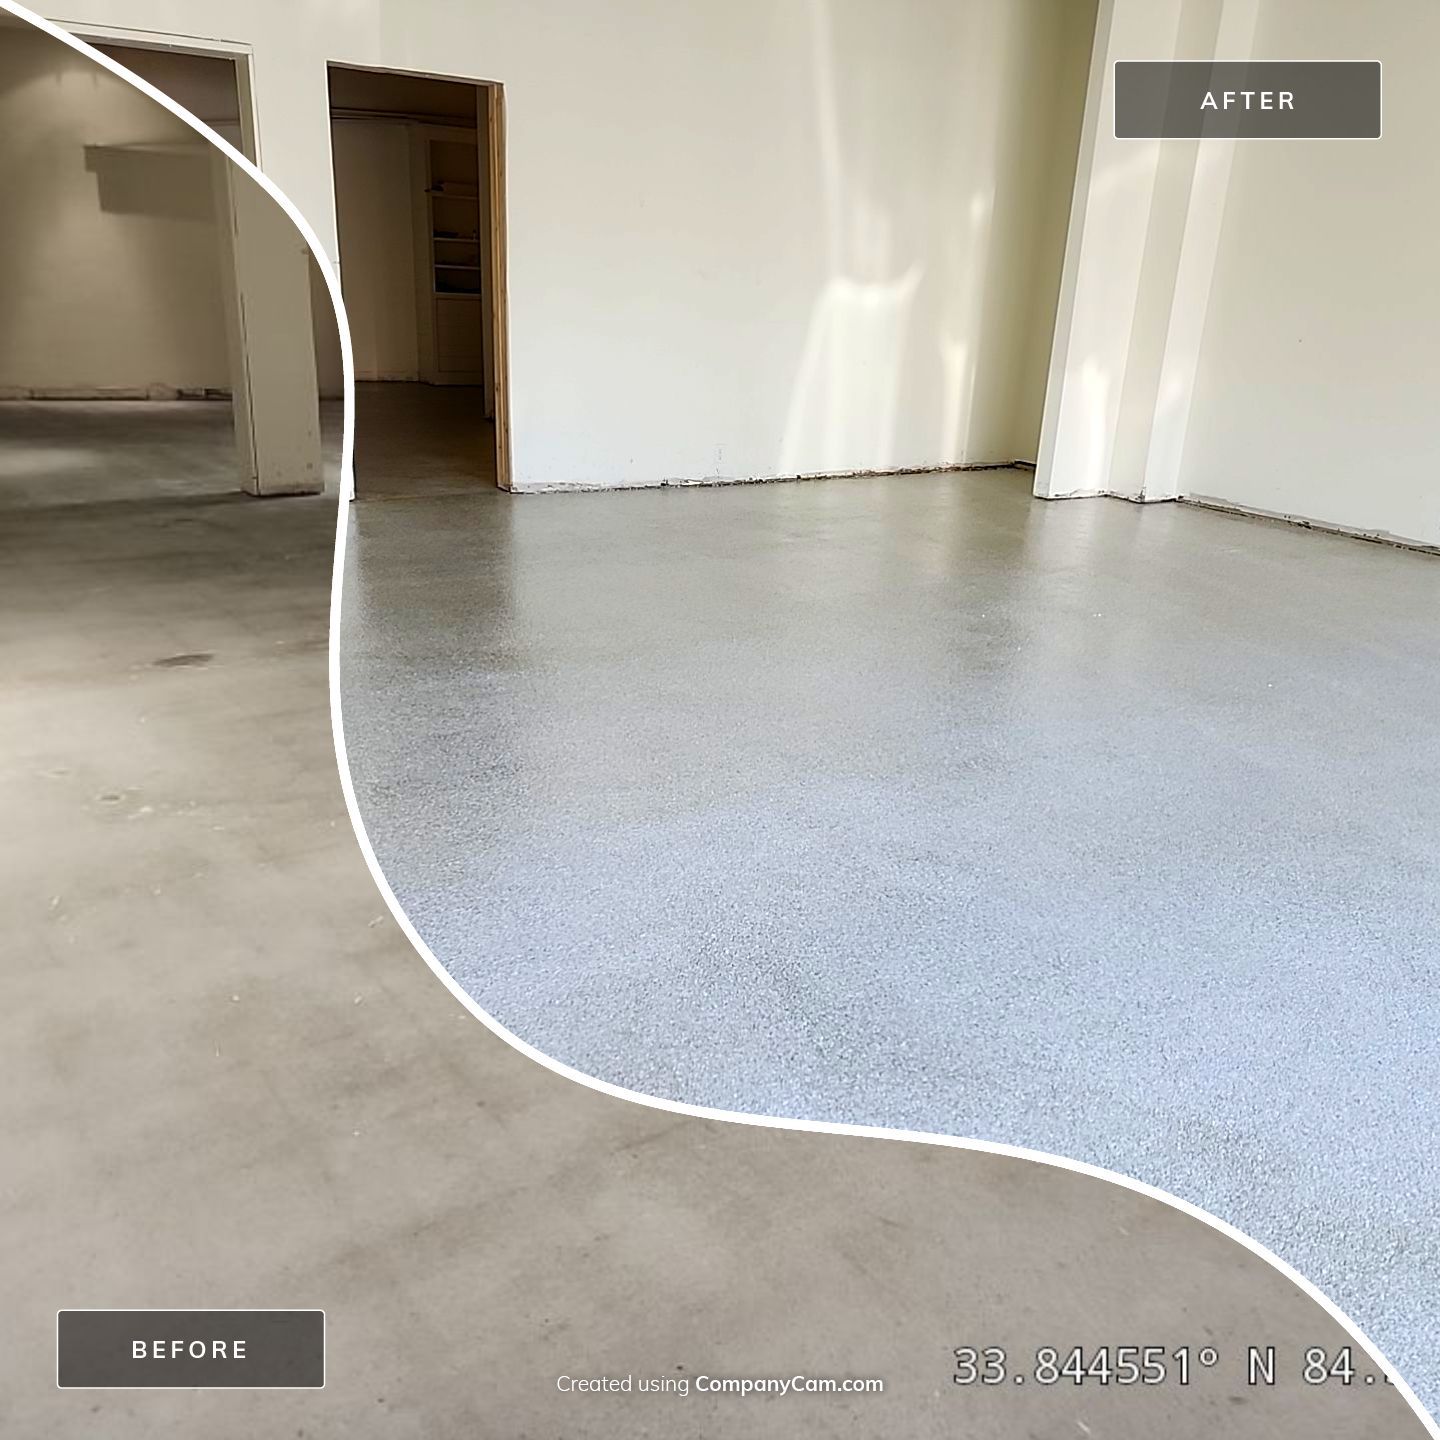 Epoxy Flooring 101: Everything You Need to Know